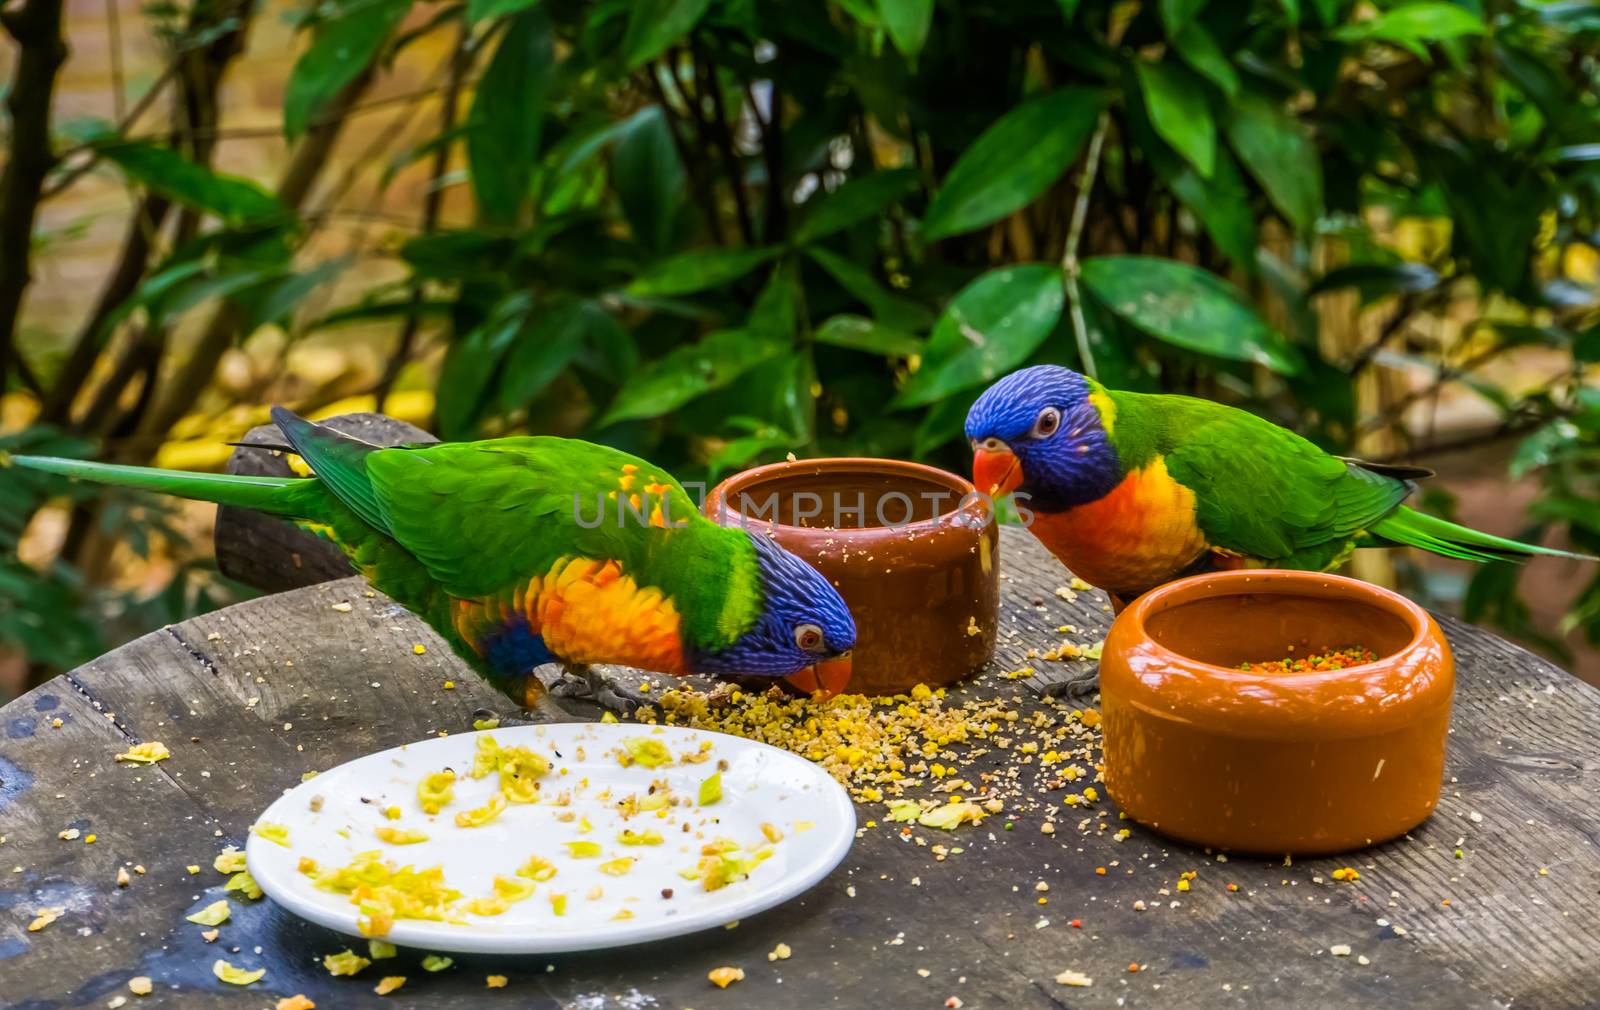 two rainbow lorikeets eating food together, bird diet, Tropical animal specie from Australia